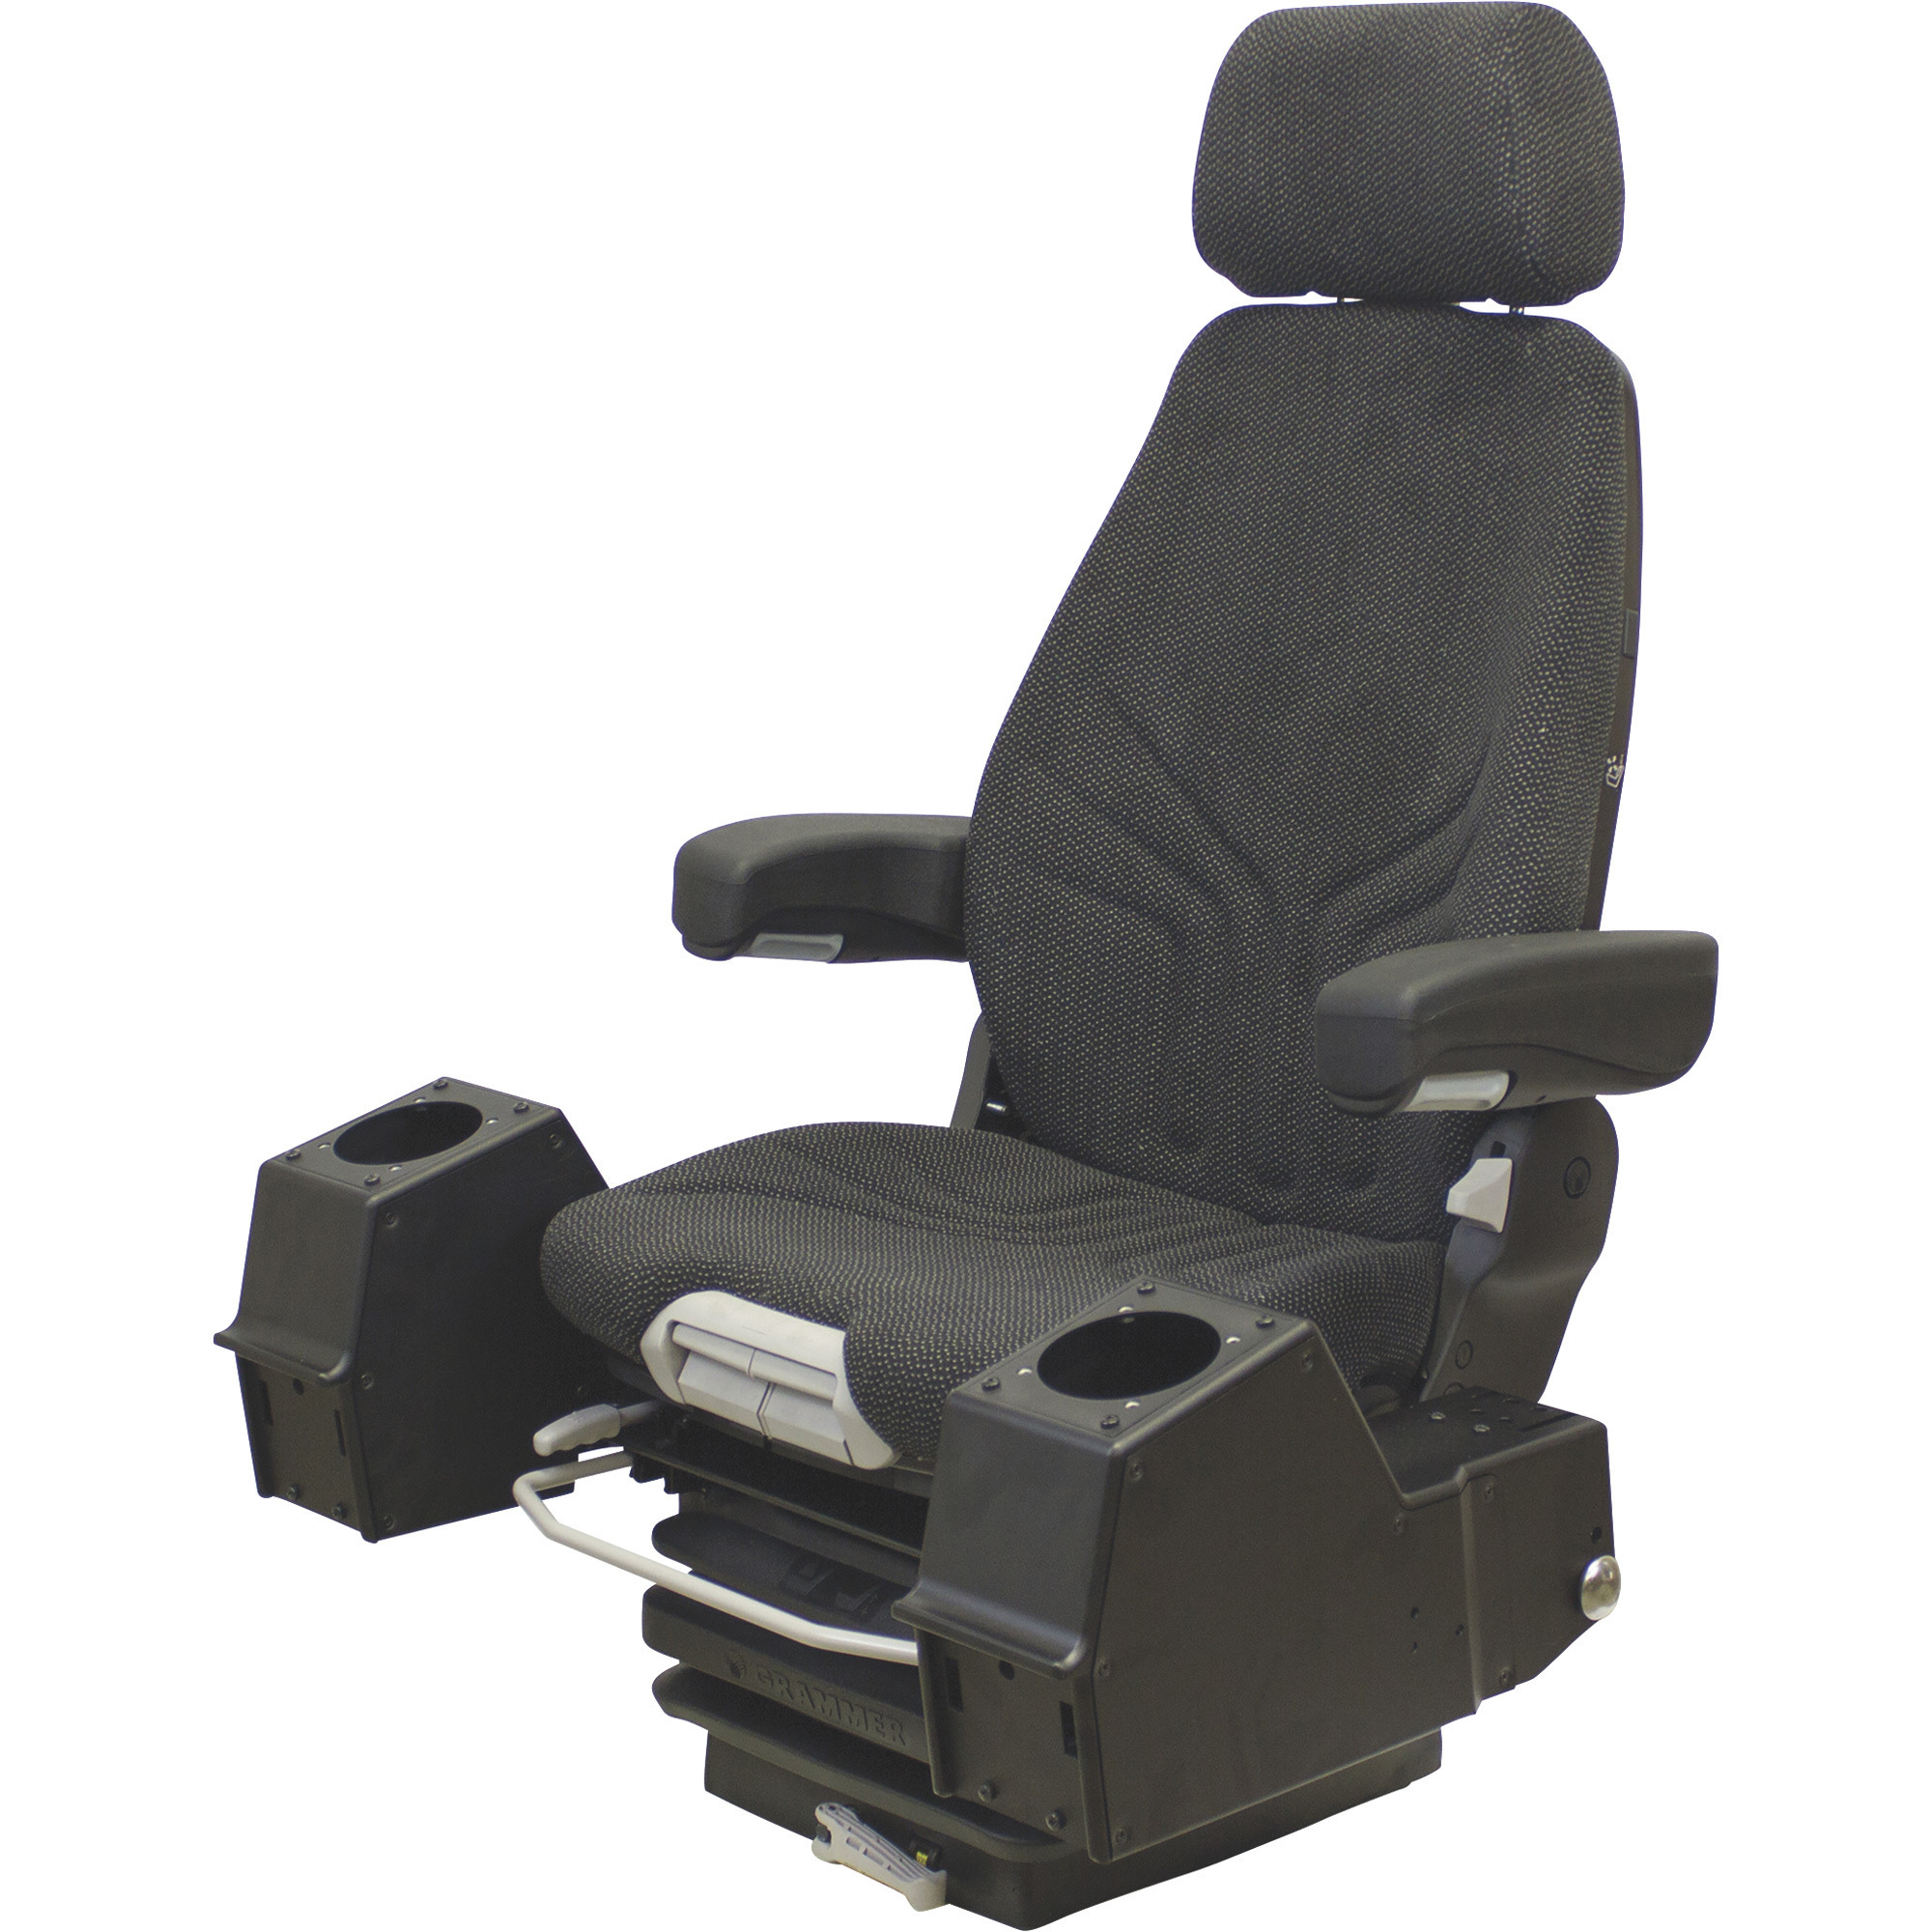 K&M High-Back Suspension Seat with Control Pods, Black/Gray, Model 8254